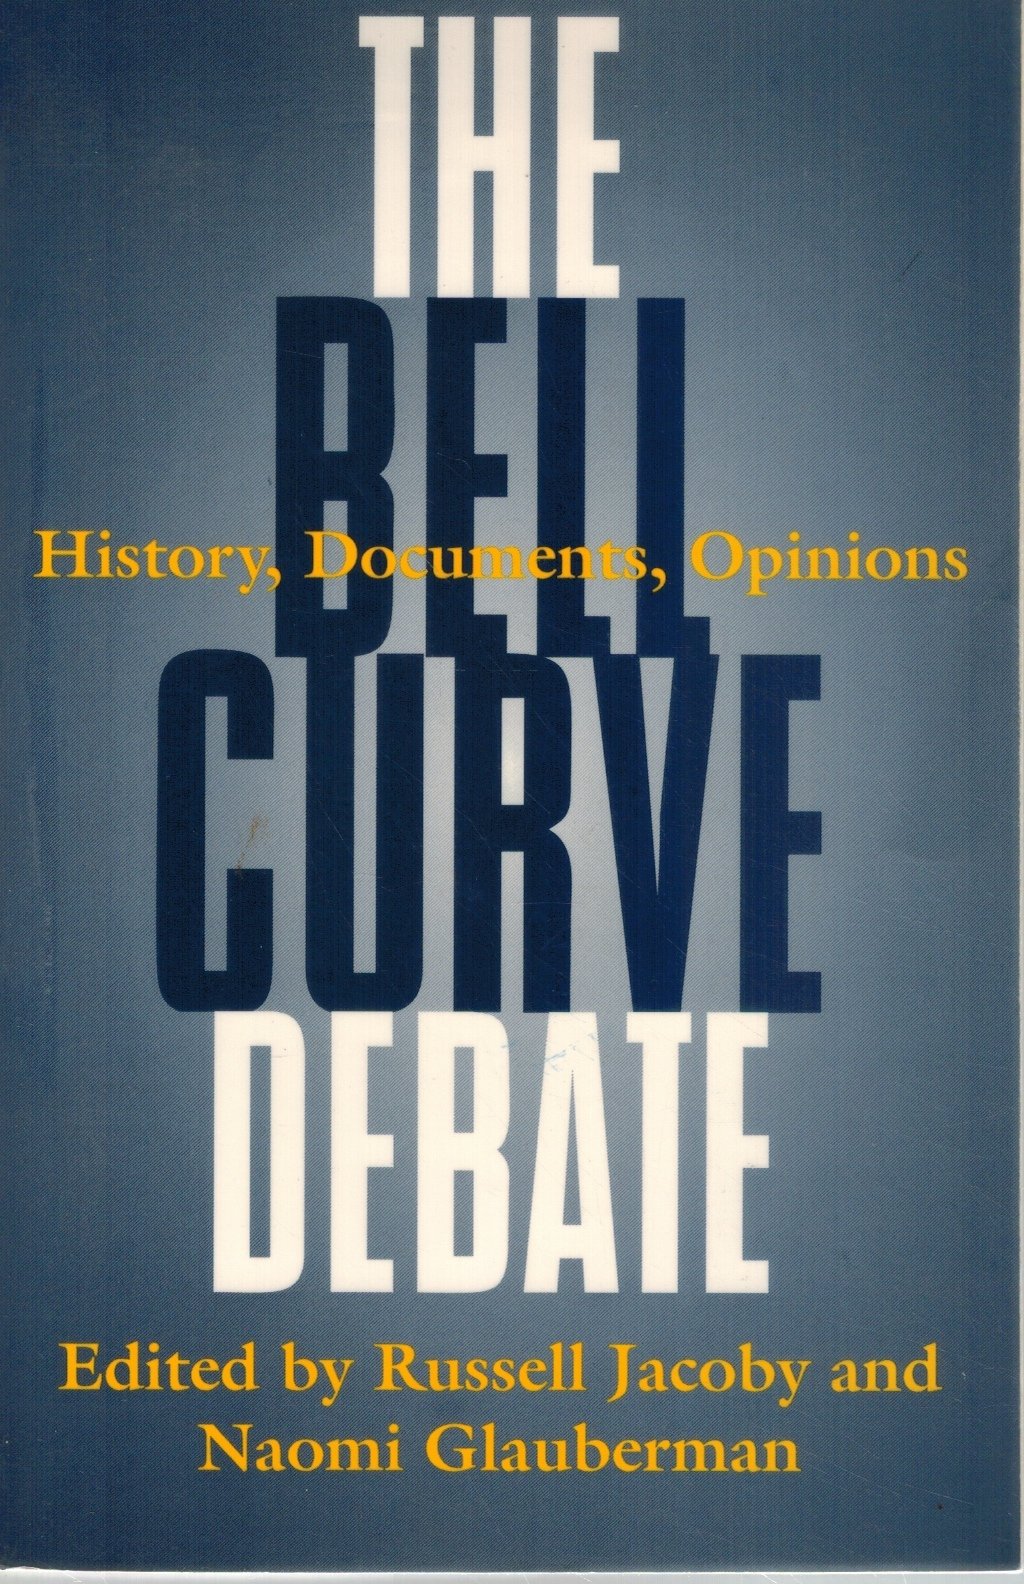 THE BELL CURVE DEBATE  by Jacoby, Russell & Naomi Glauberman